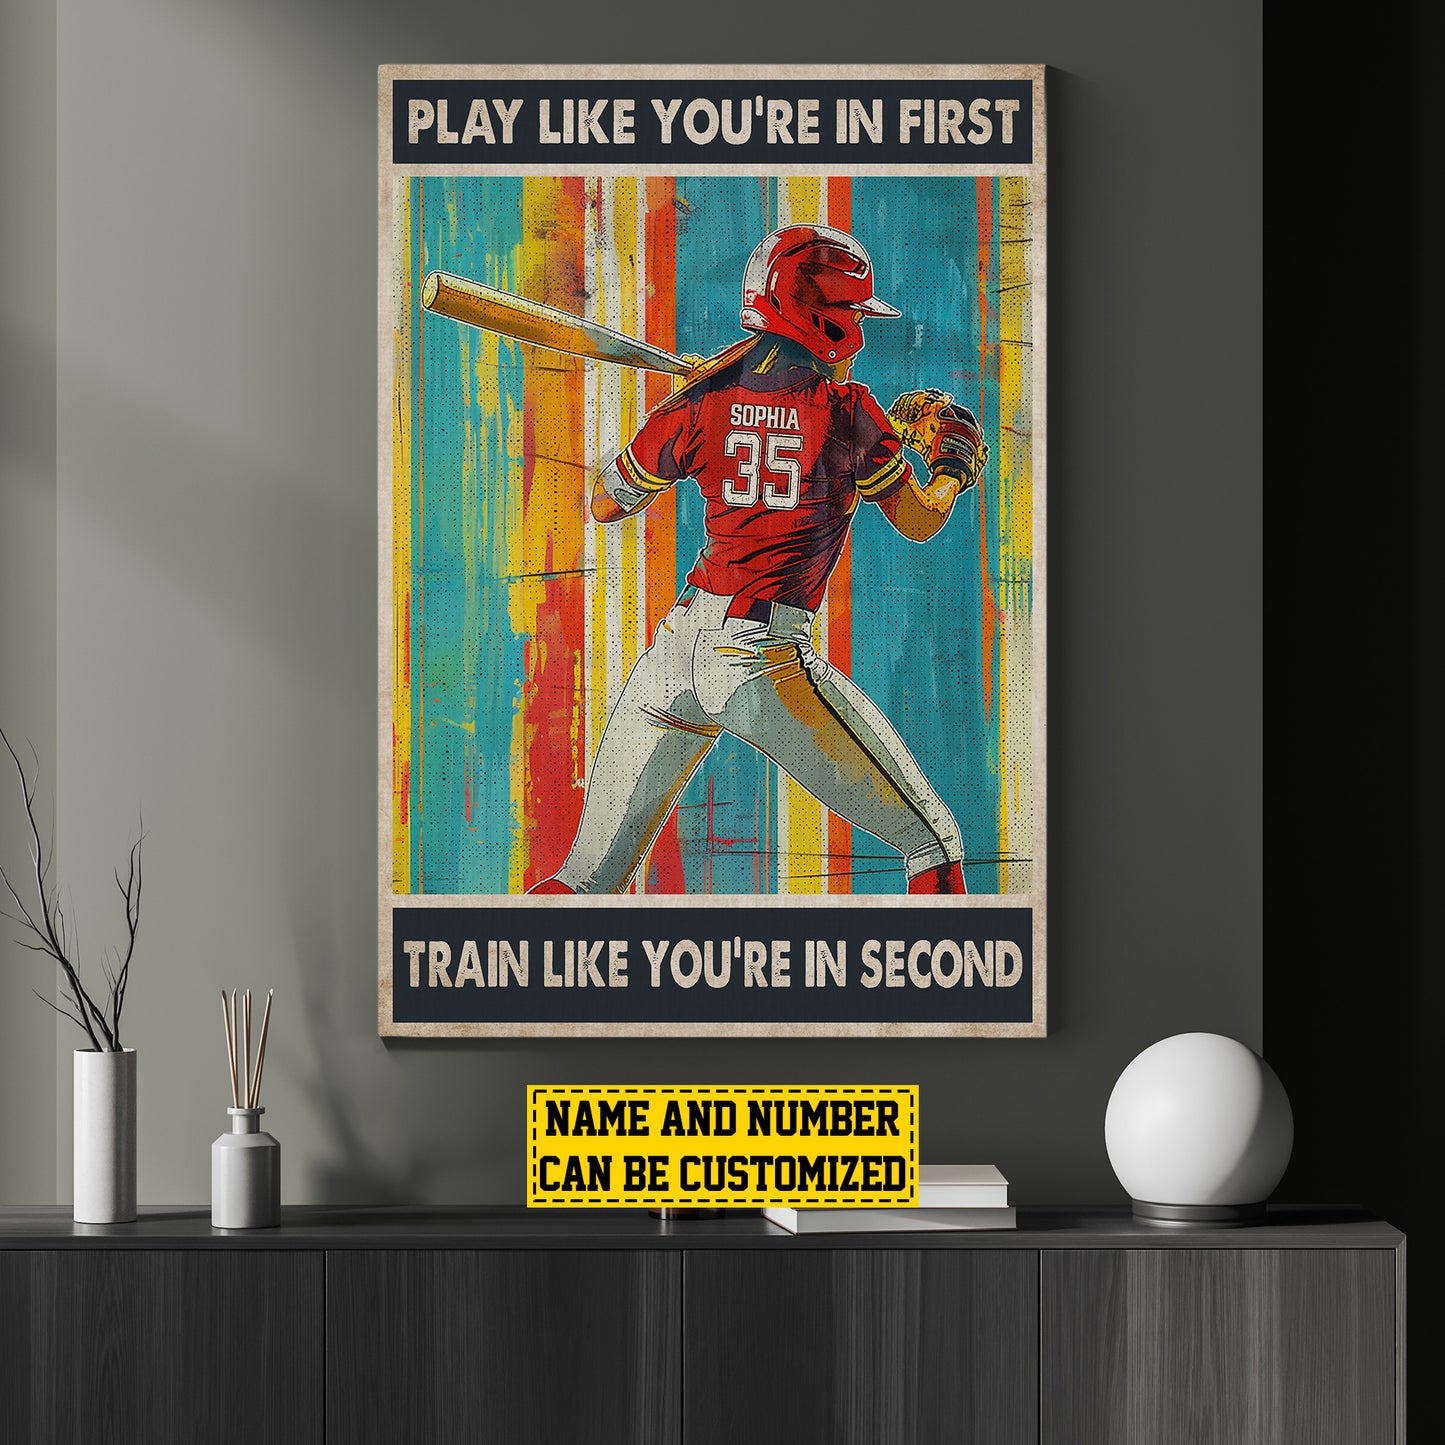 Play Like You're In First, Personalized Softball Girl Canvas Painting, Inspirational Quotes Wall Art Decor, Poster Gift For Softball Lovers, Softball Players